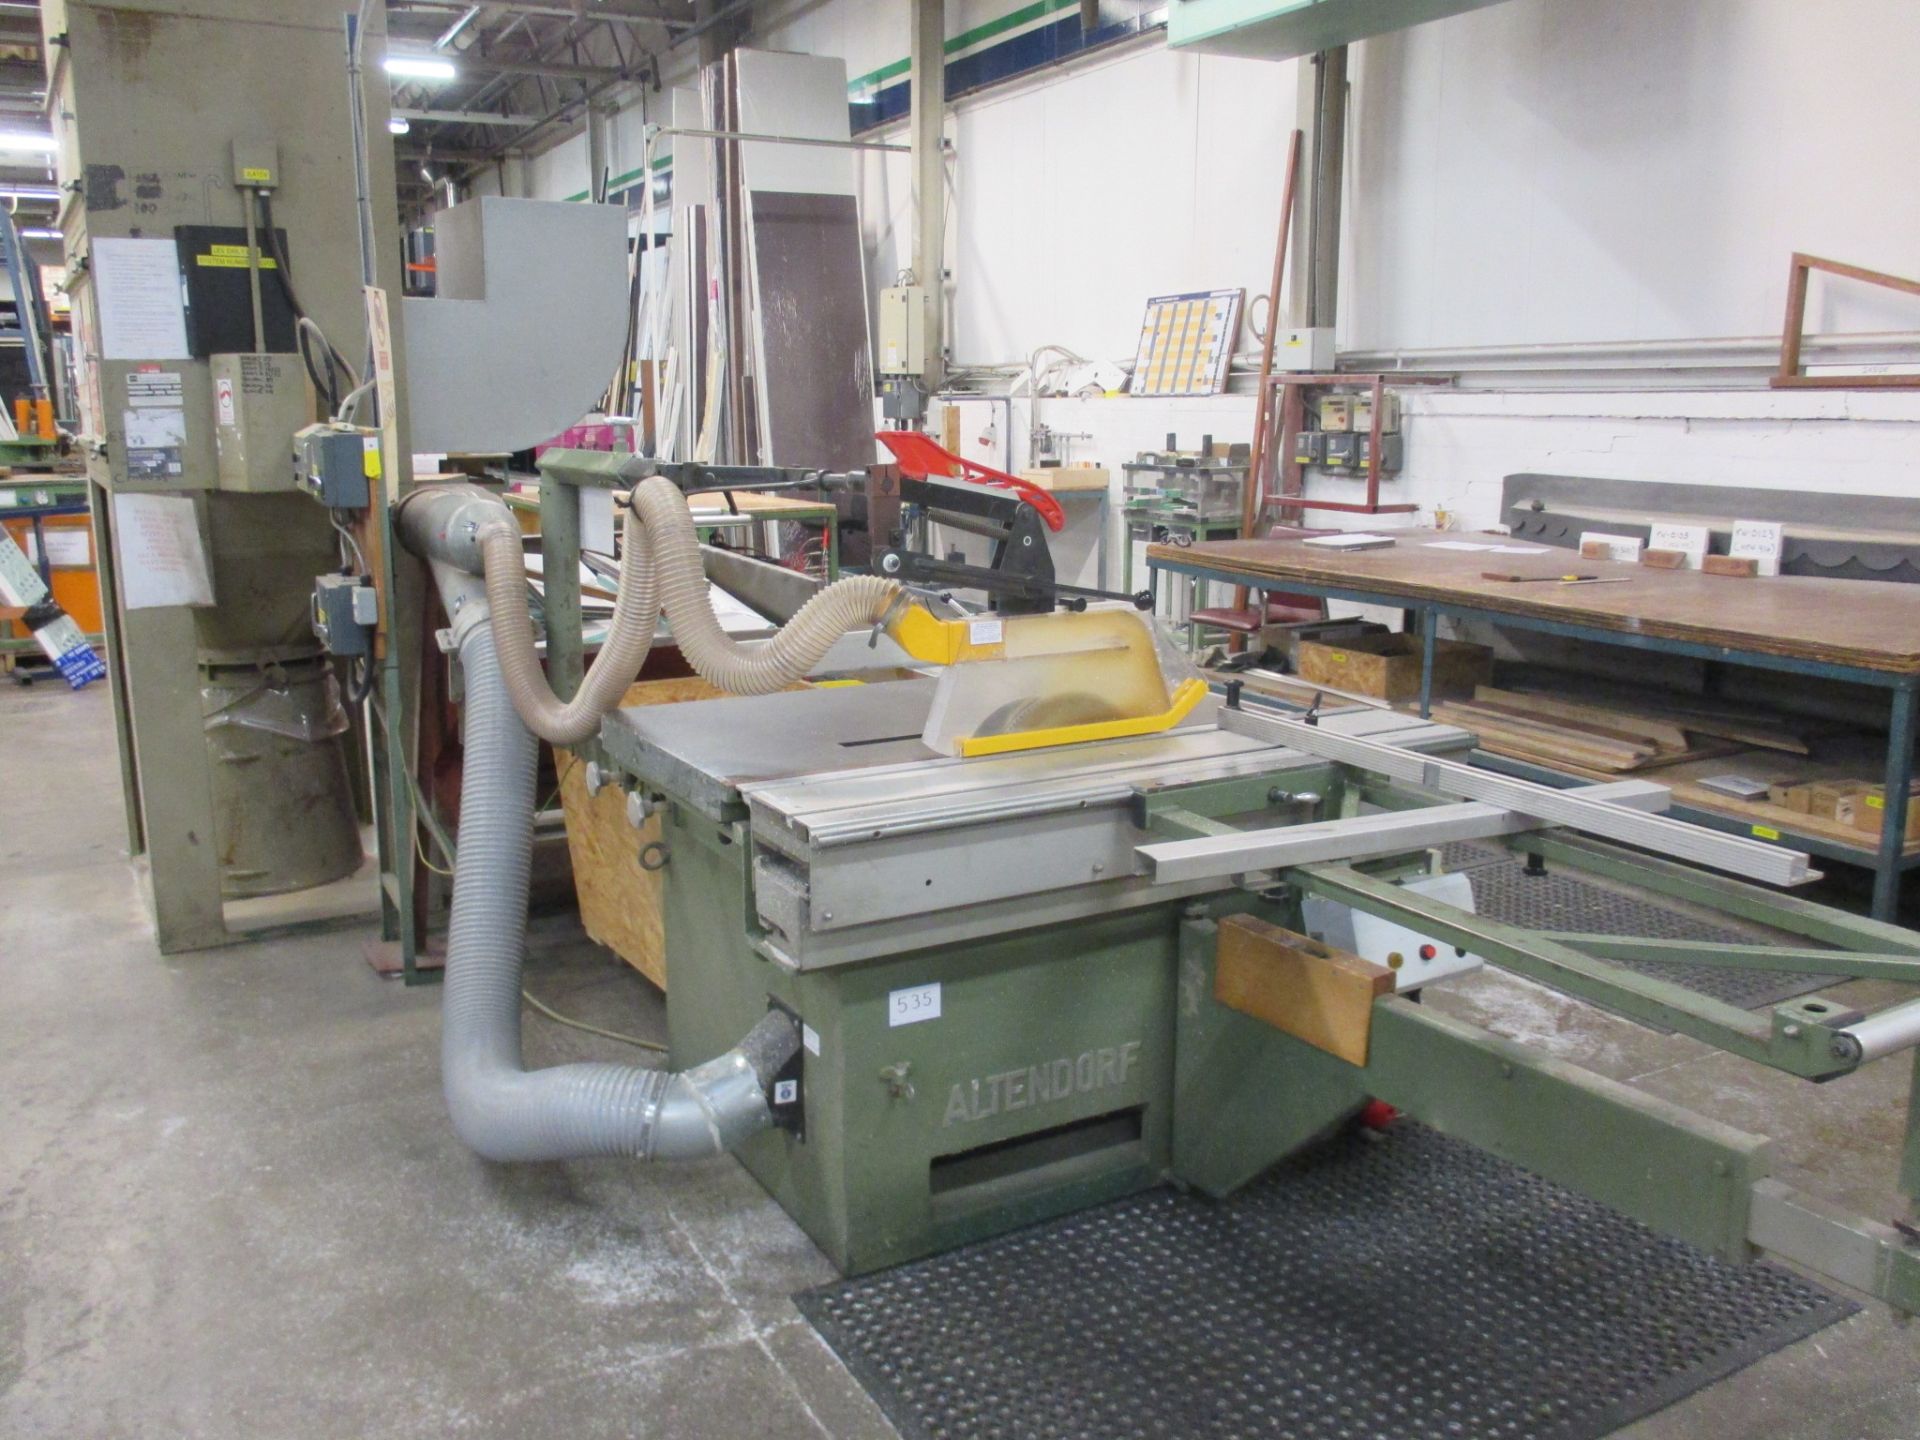 1: Altendorf, Sliding Table Saw With Extraction Unit , Serial Number: 85-12-132